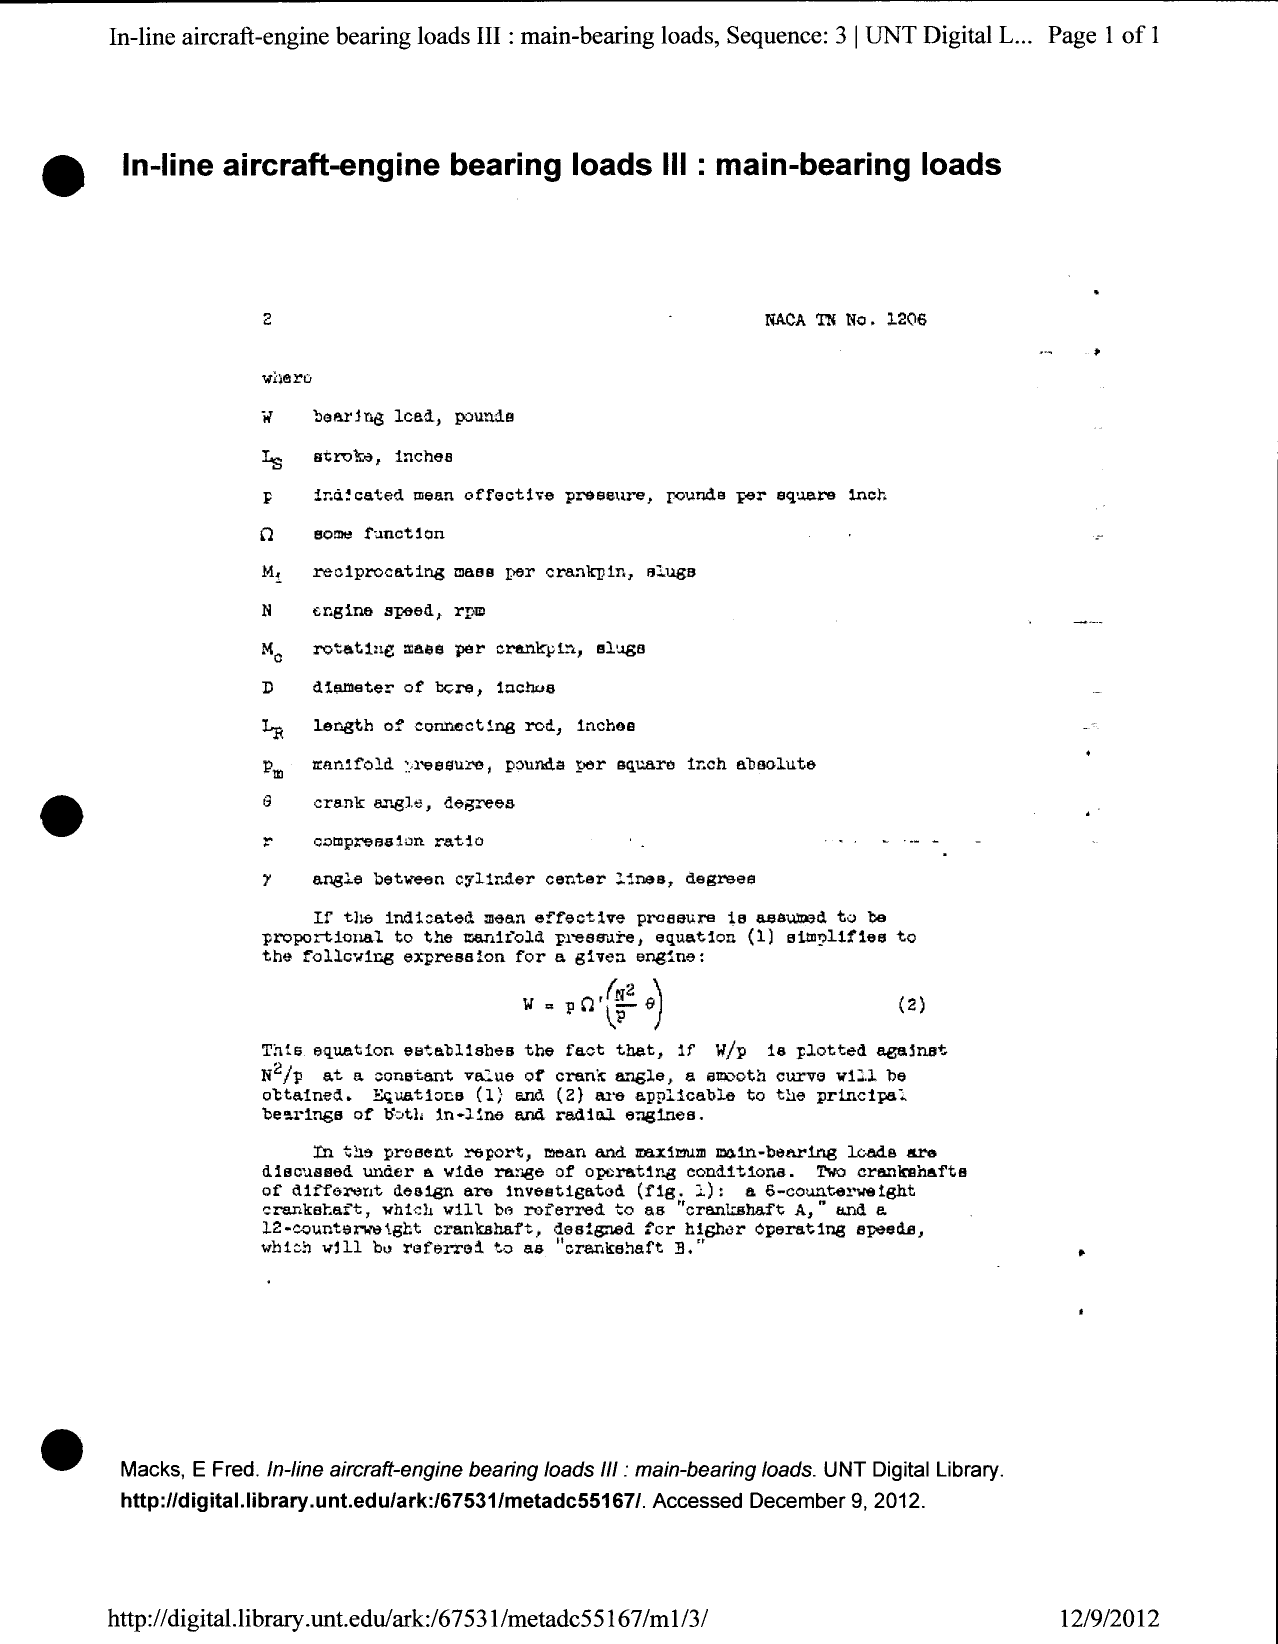 Sample page 3 from AirCorps Library document: In-Line Aircraft-Engine Bearing Loads